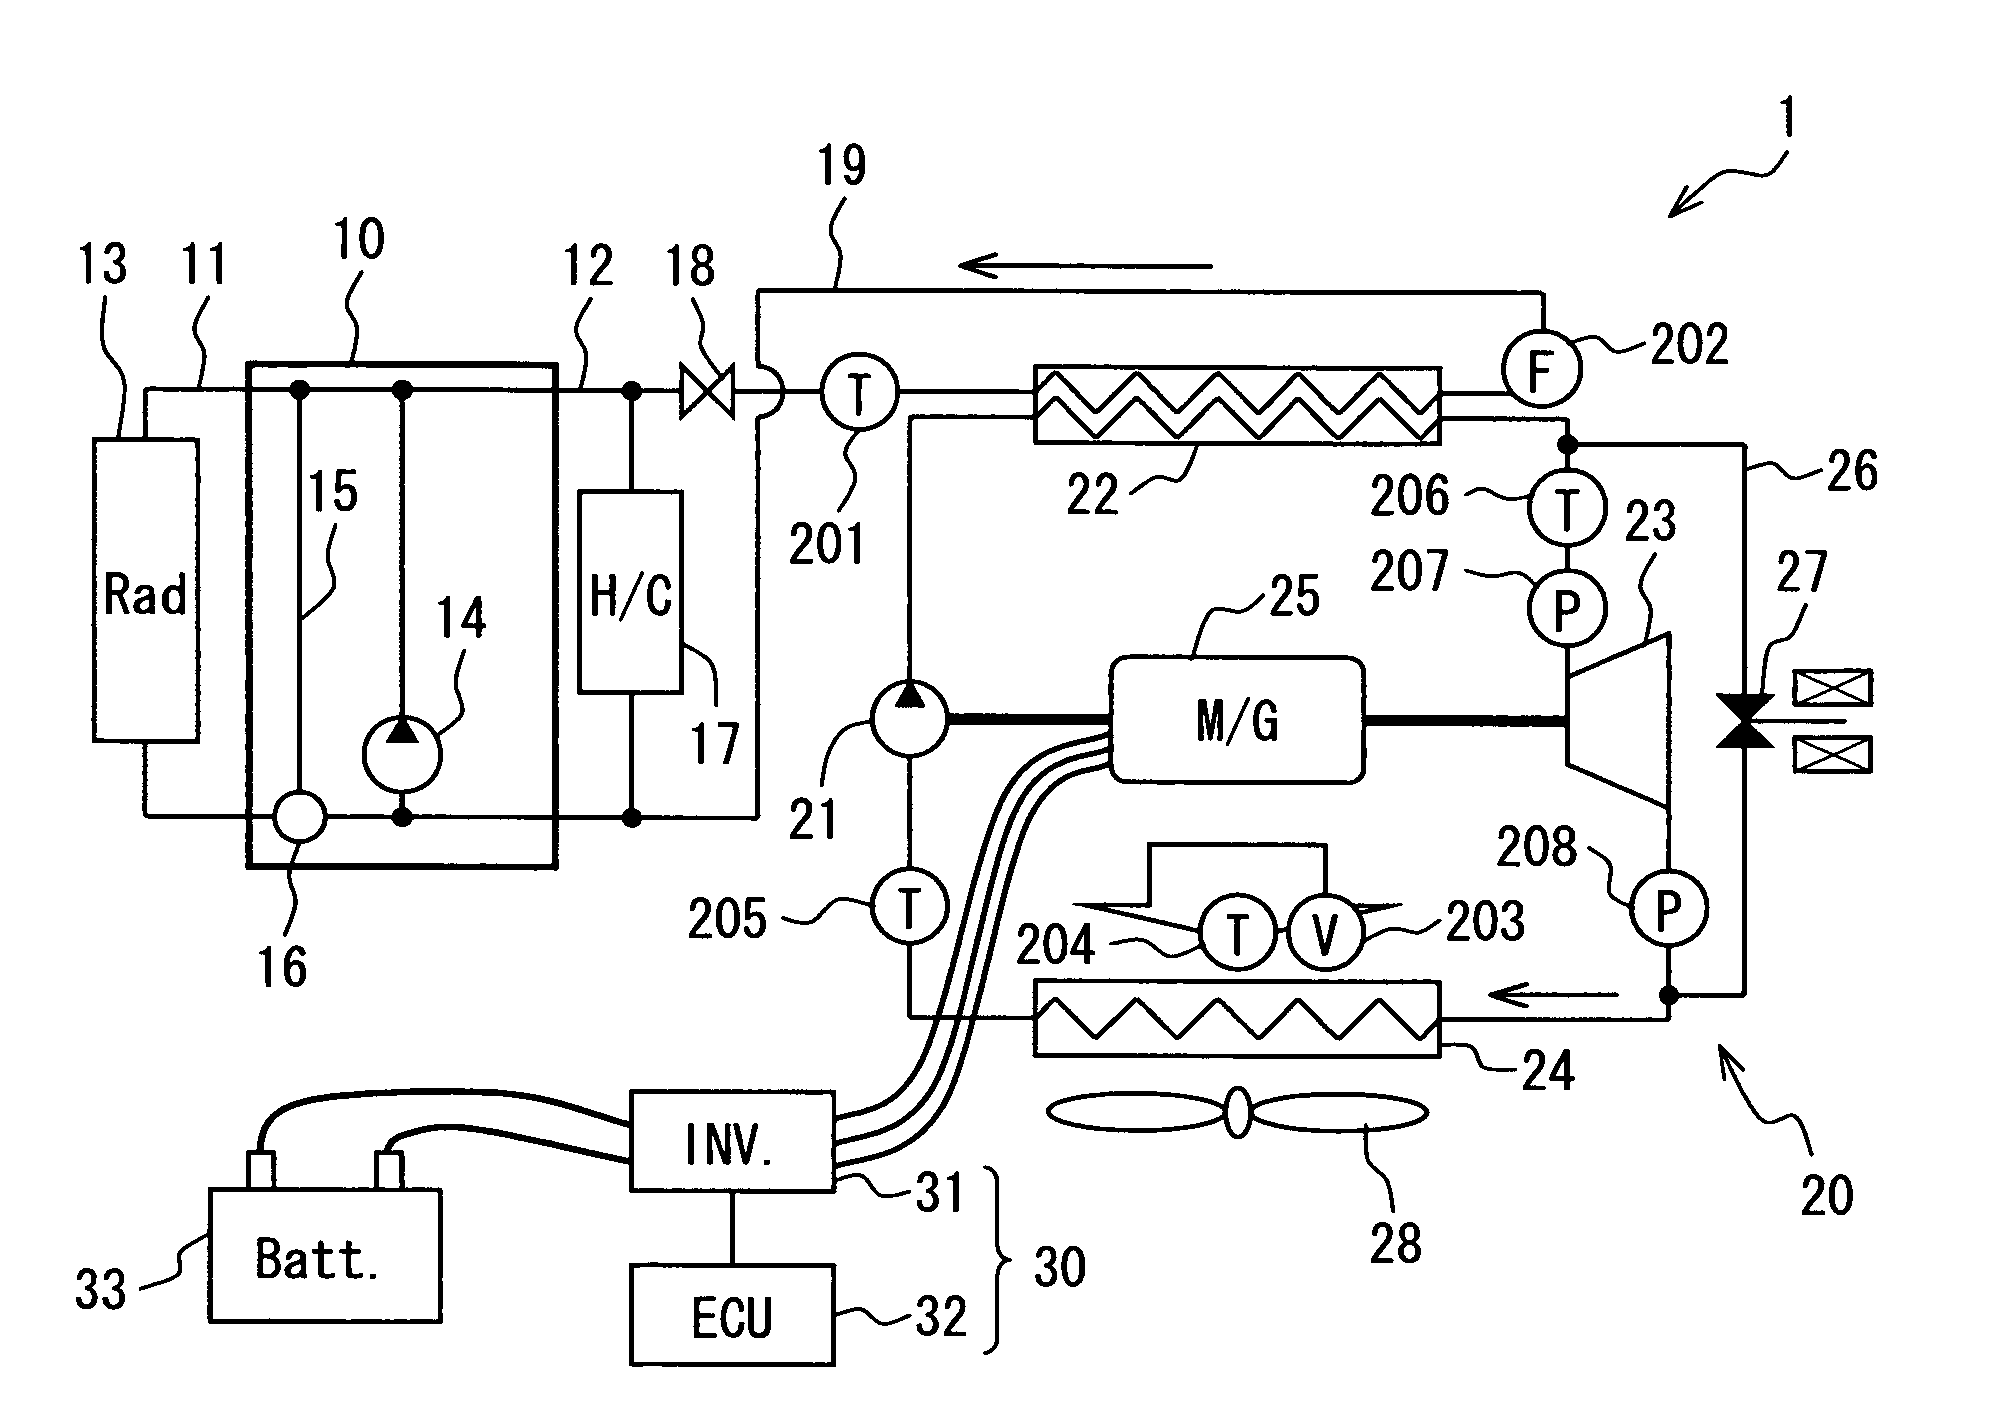 Waste heat recovery apparatus